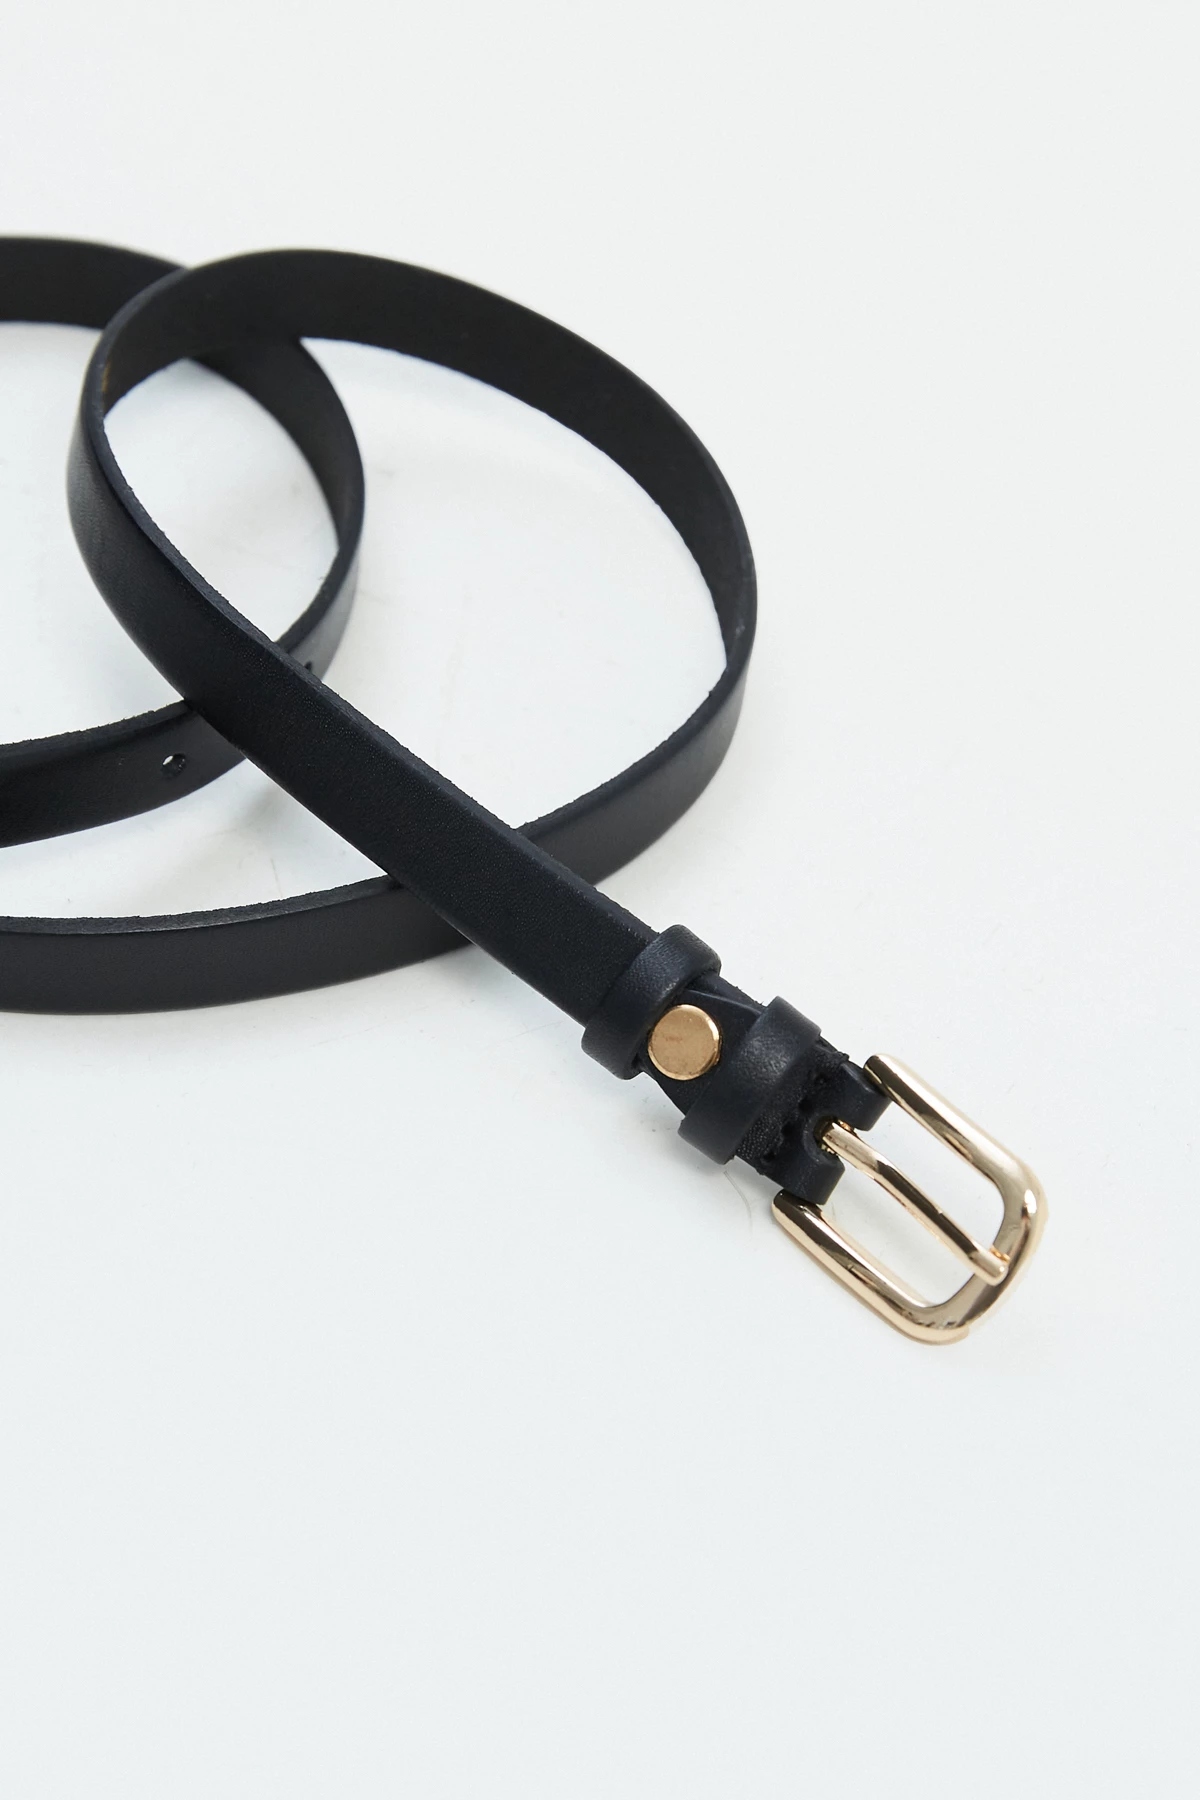 Black leather belt with rectangular gold buckle, photo 1